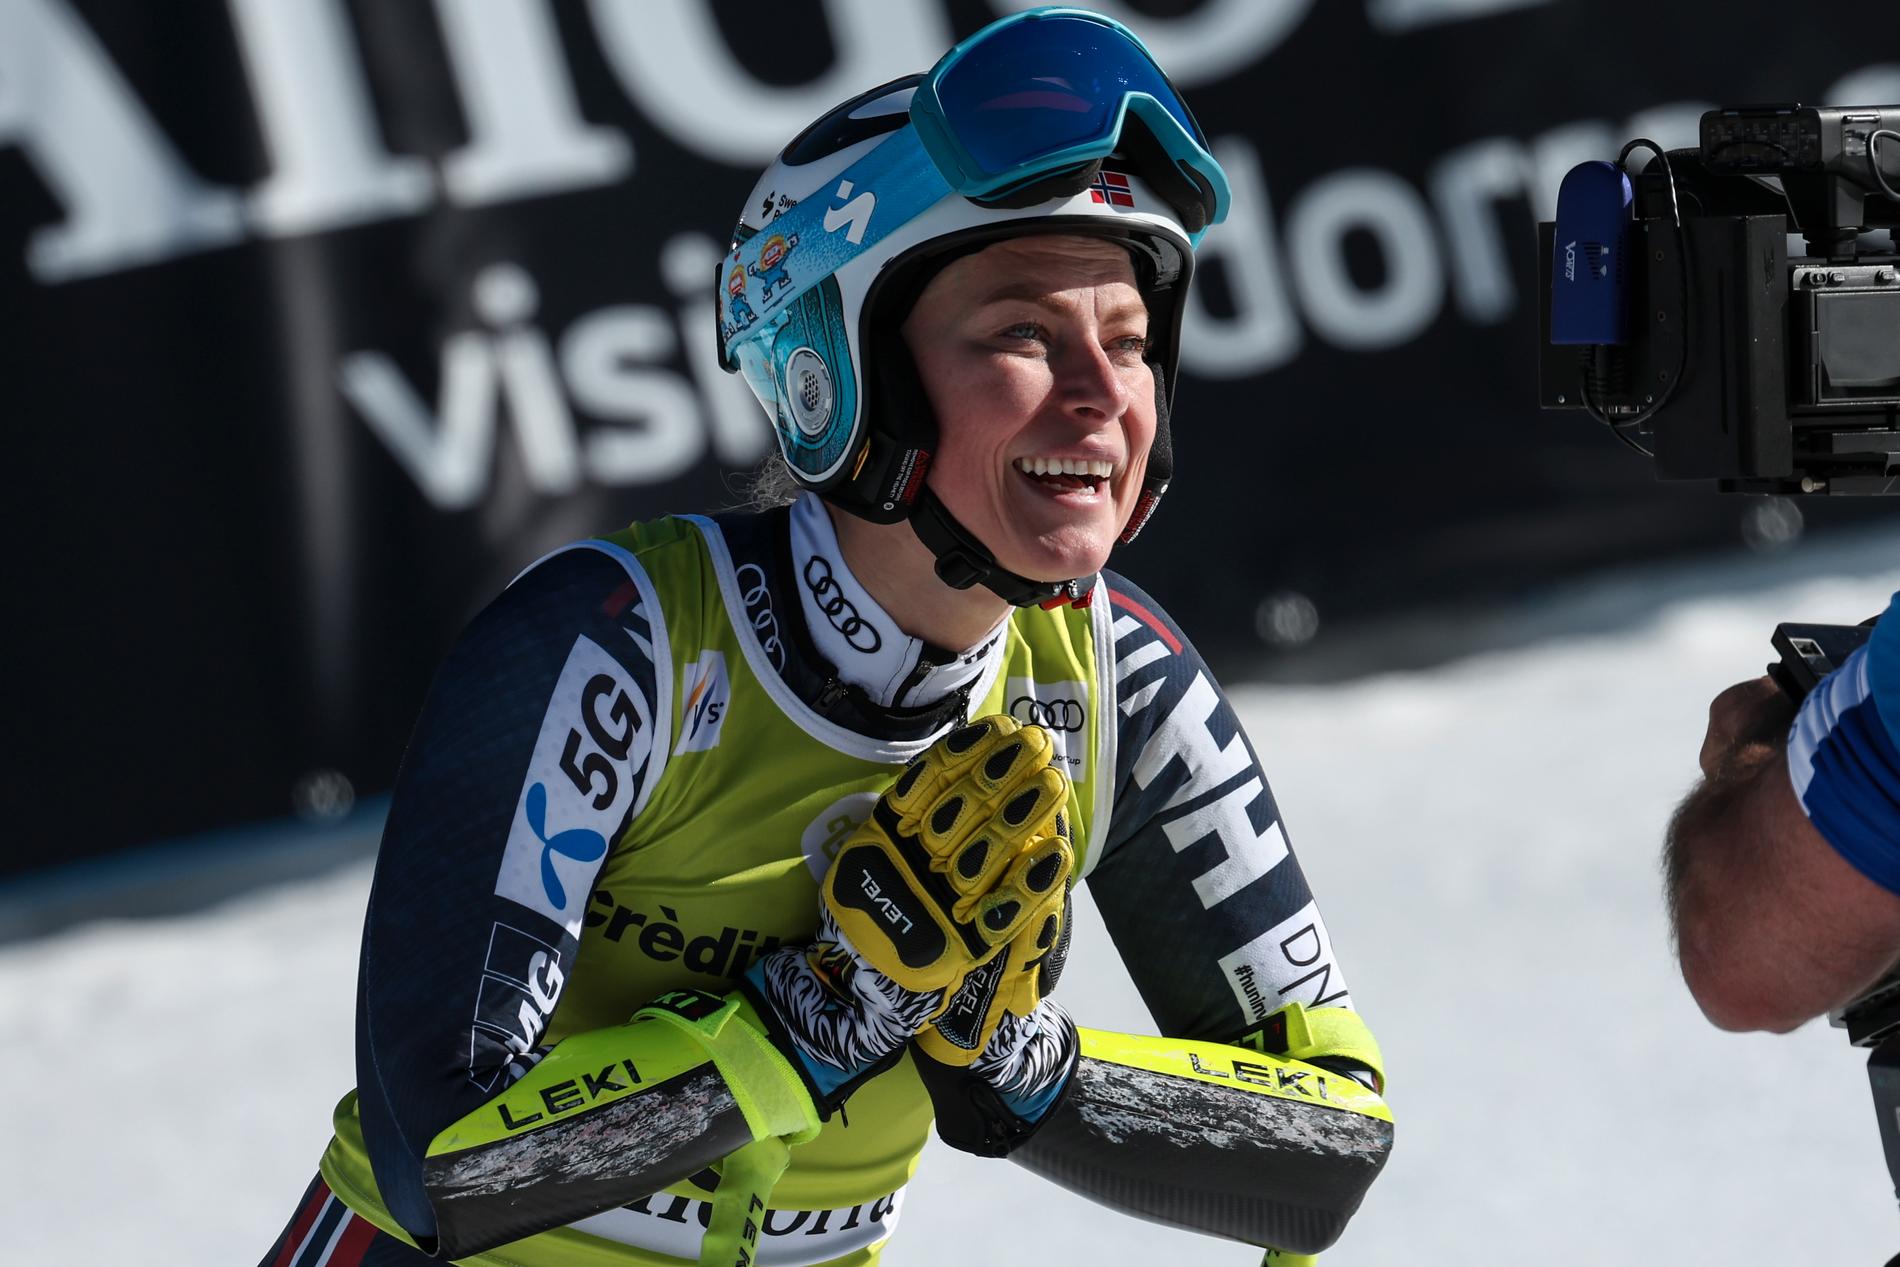 Mowinkel with the first Norwegian podium in a cup in 23 years